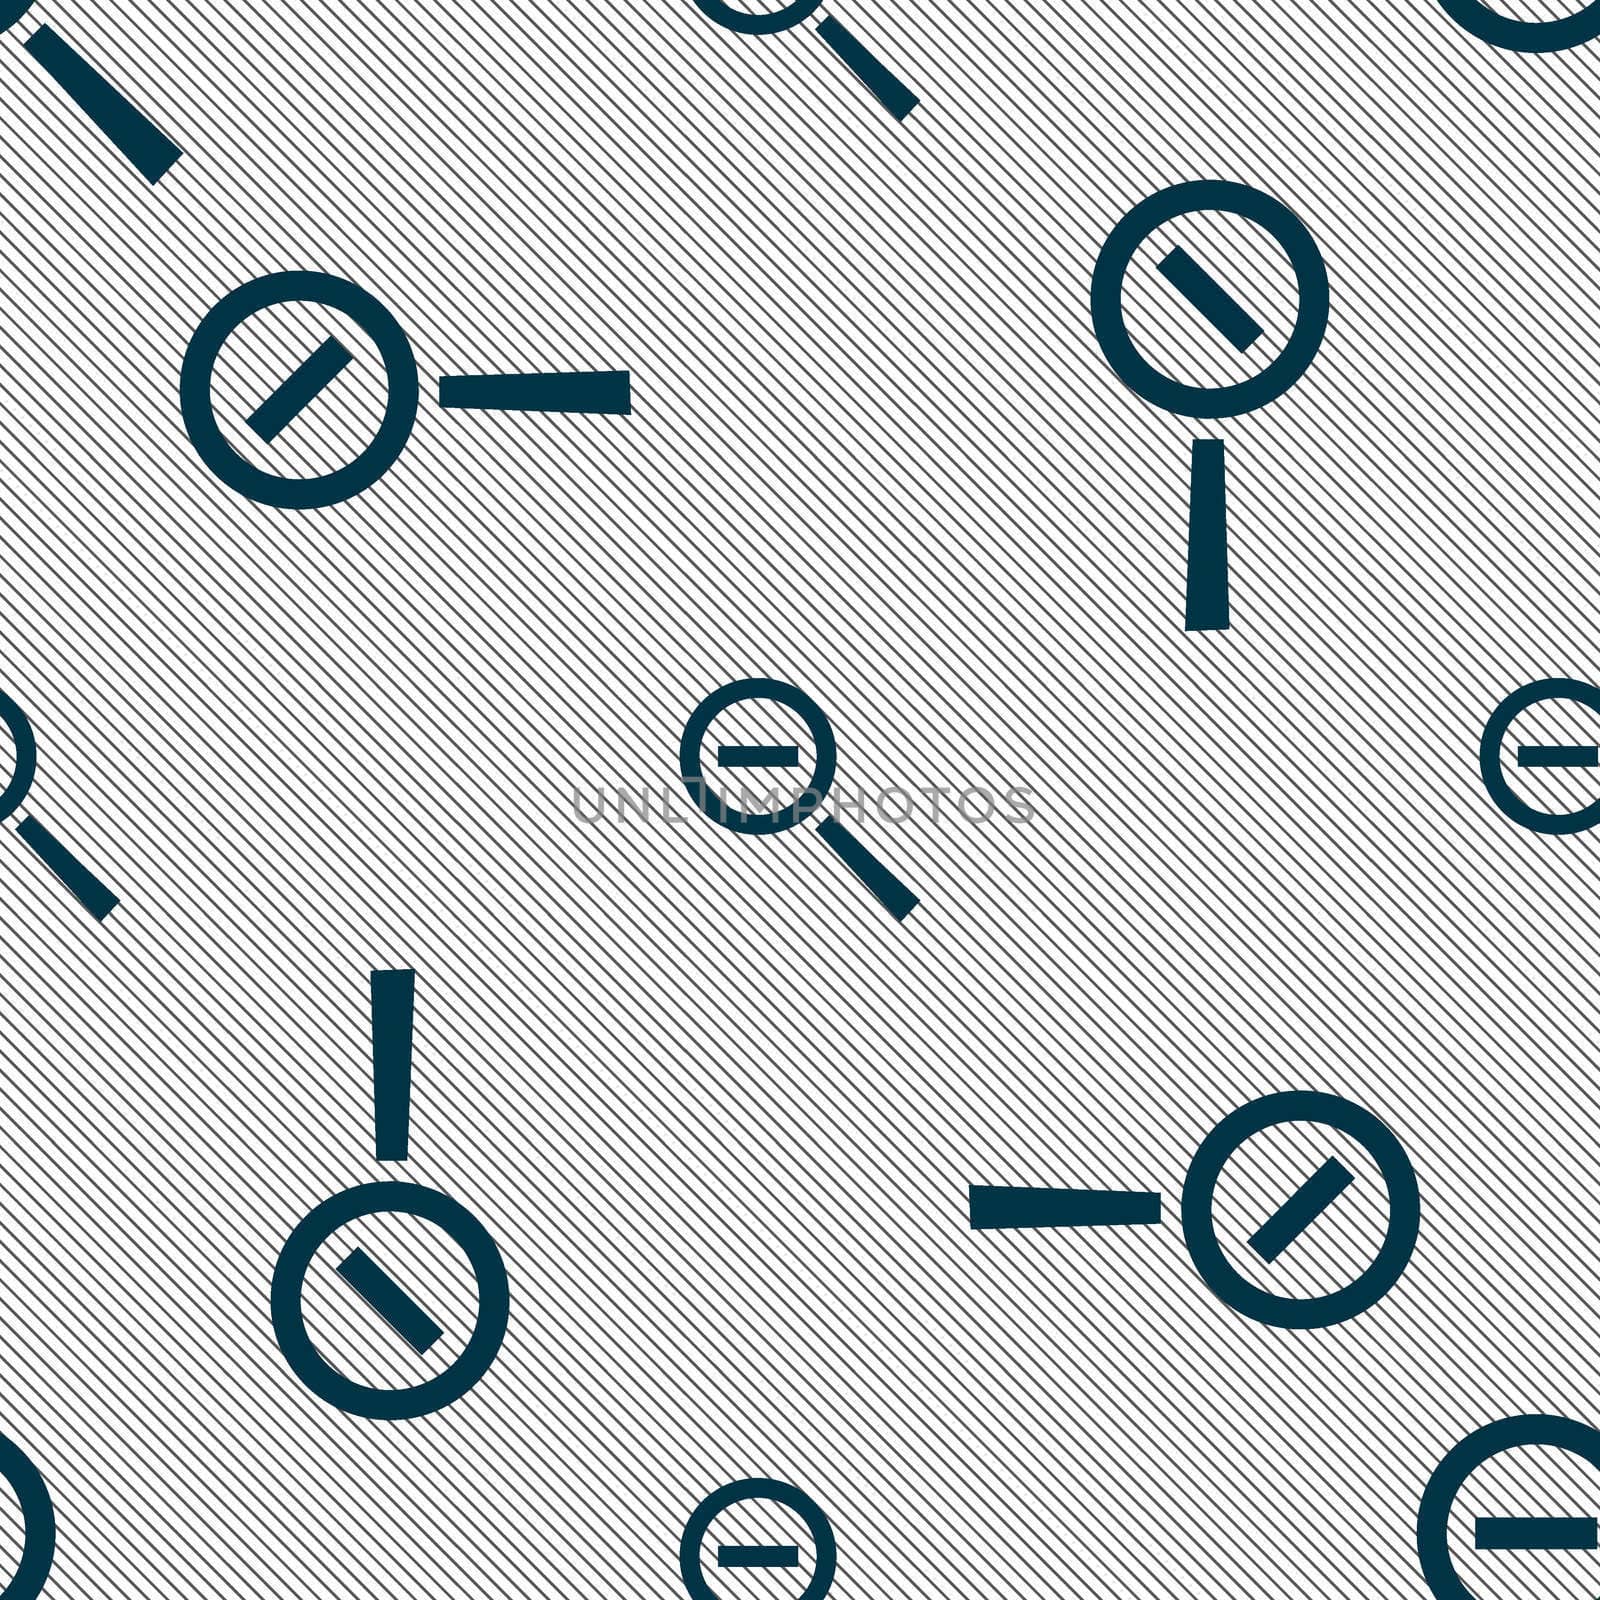 Magnifier glass, Zoom tool icon sign. Seamless pattern with geometric texture. illustration